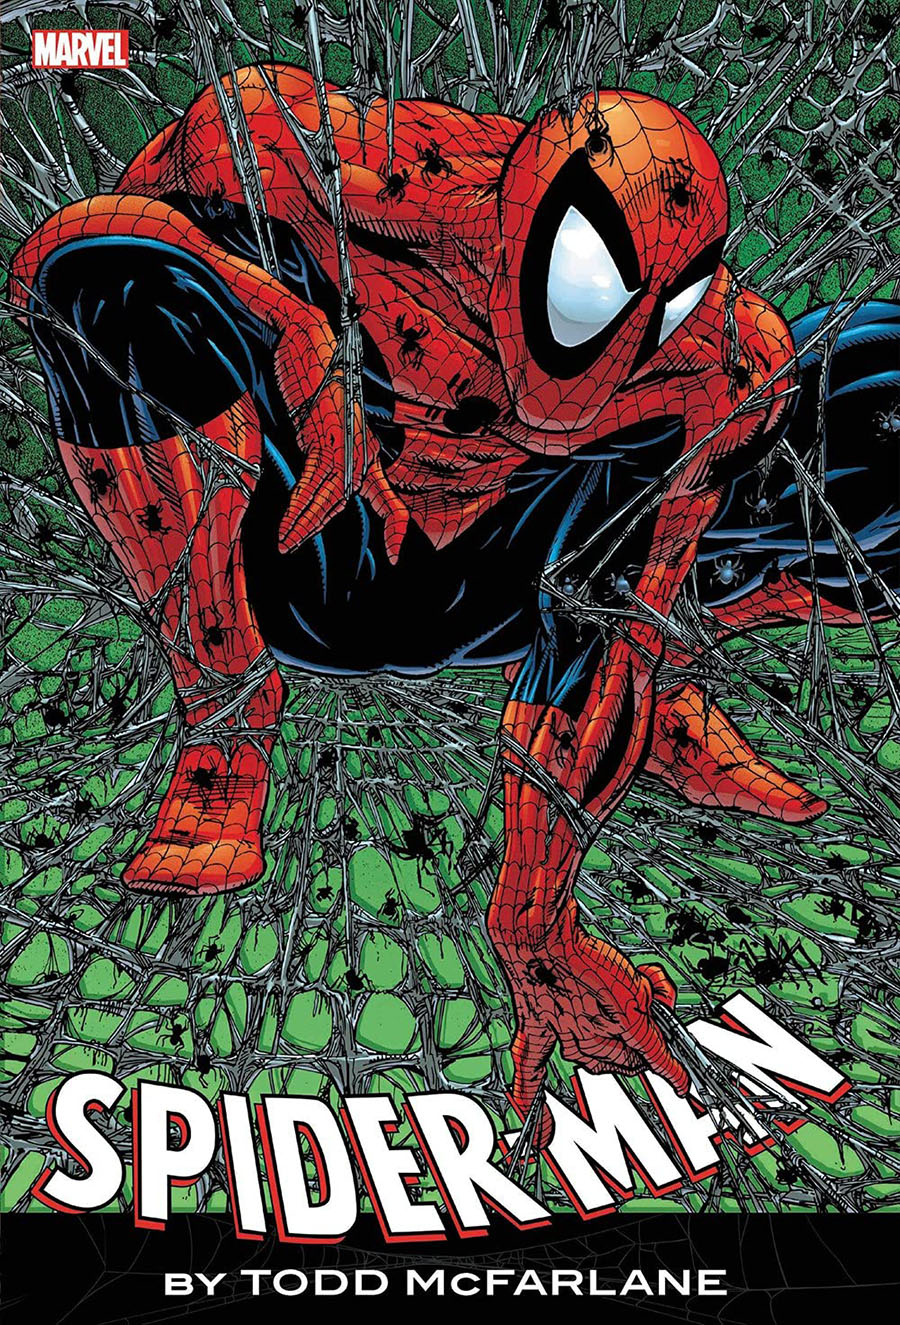 Spider-Man By Todd McFarlane Omnibus HC Book Market Todd McFarlane Red & Blue Costume Cover New Printing